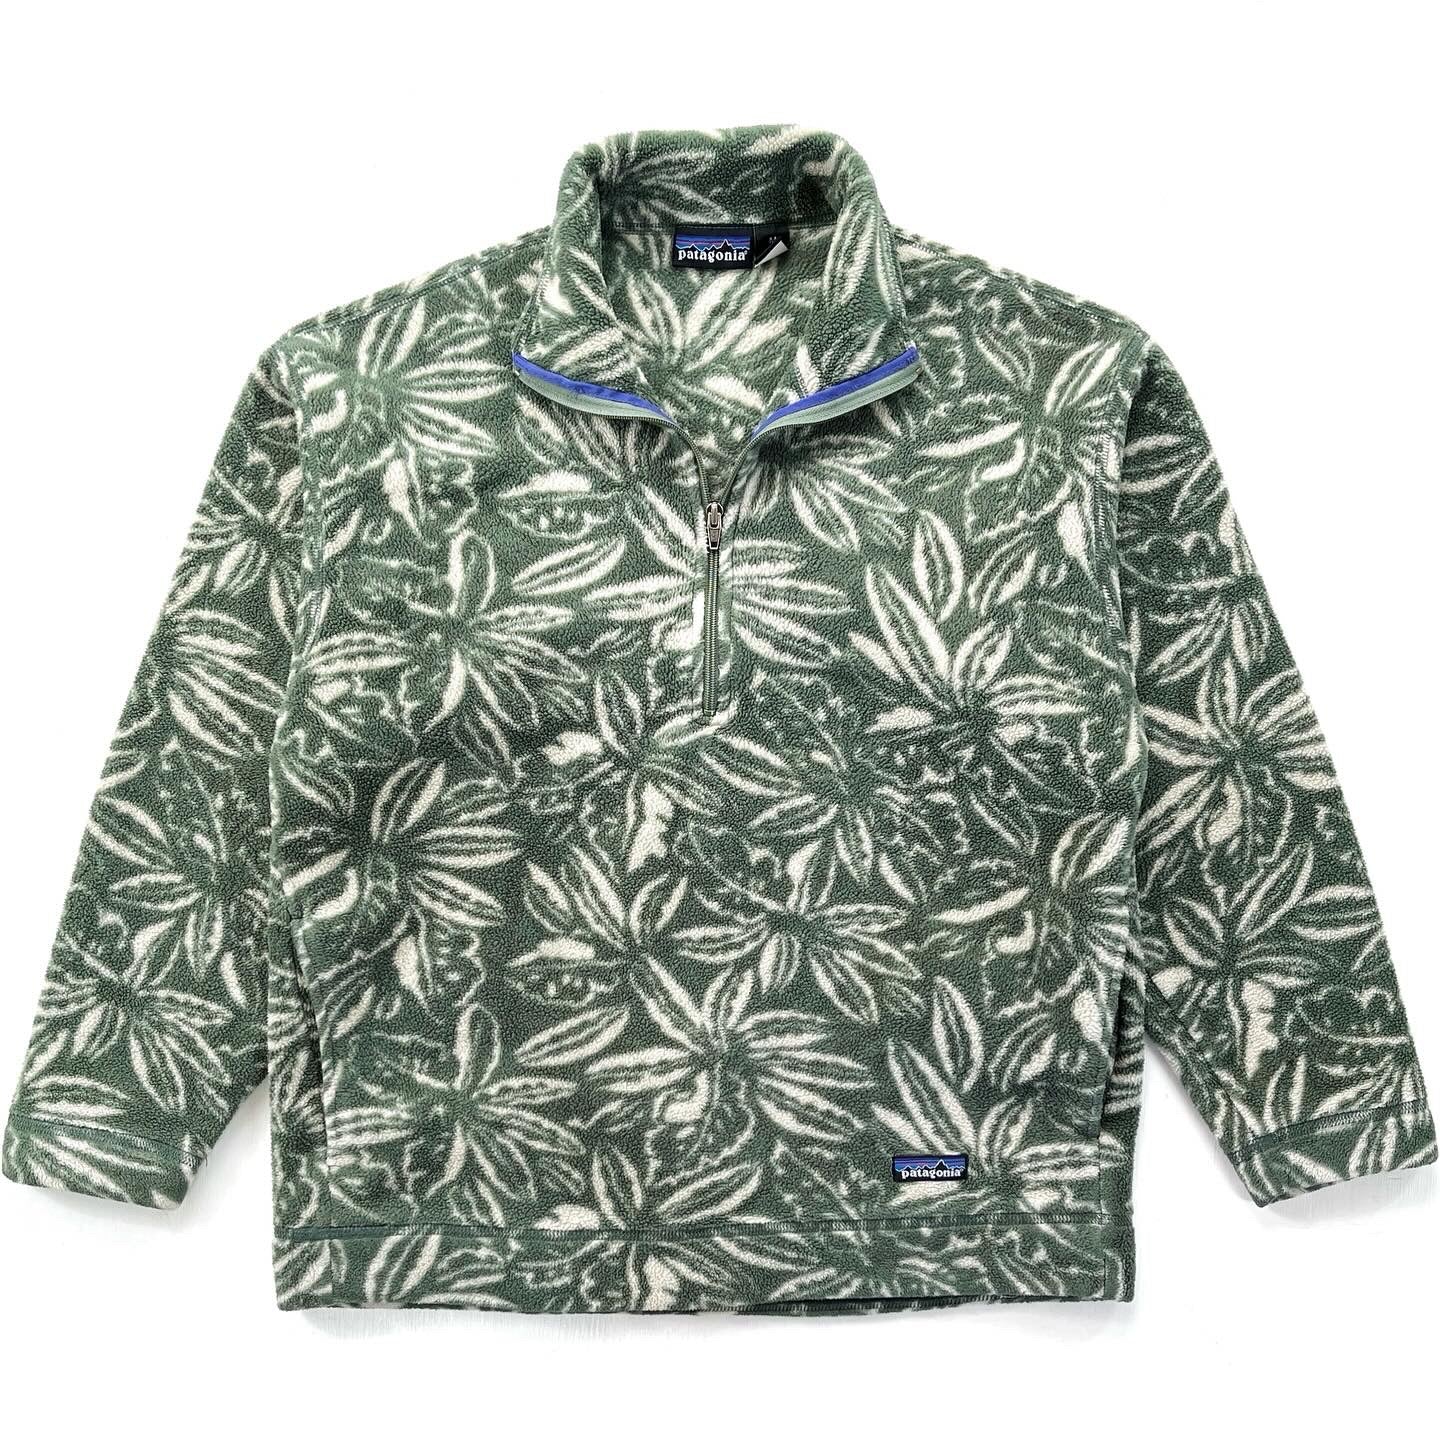 1995 Patagonia Printed Synchilla Sweater, Tropical: Light Green (M)